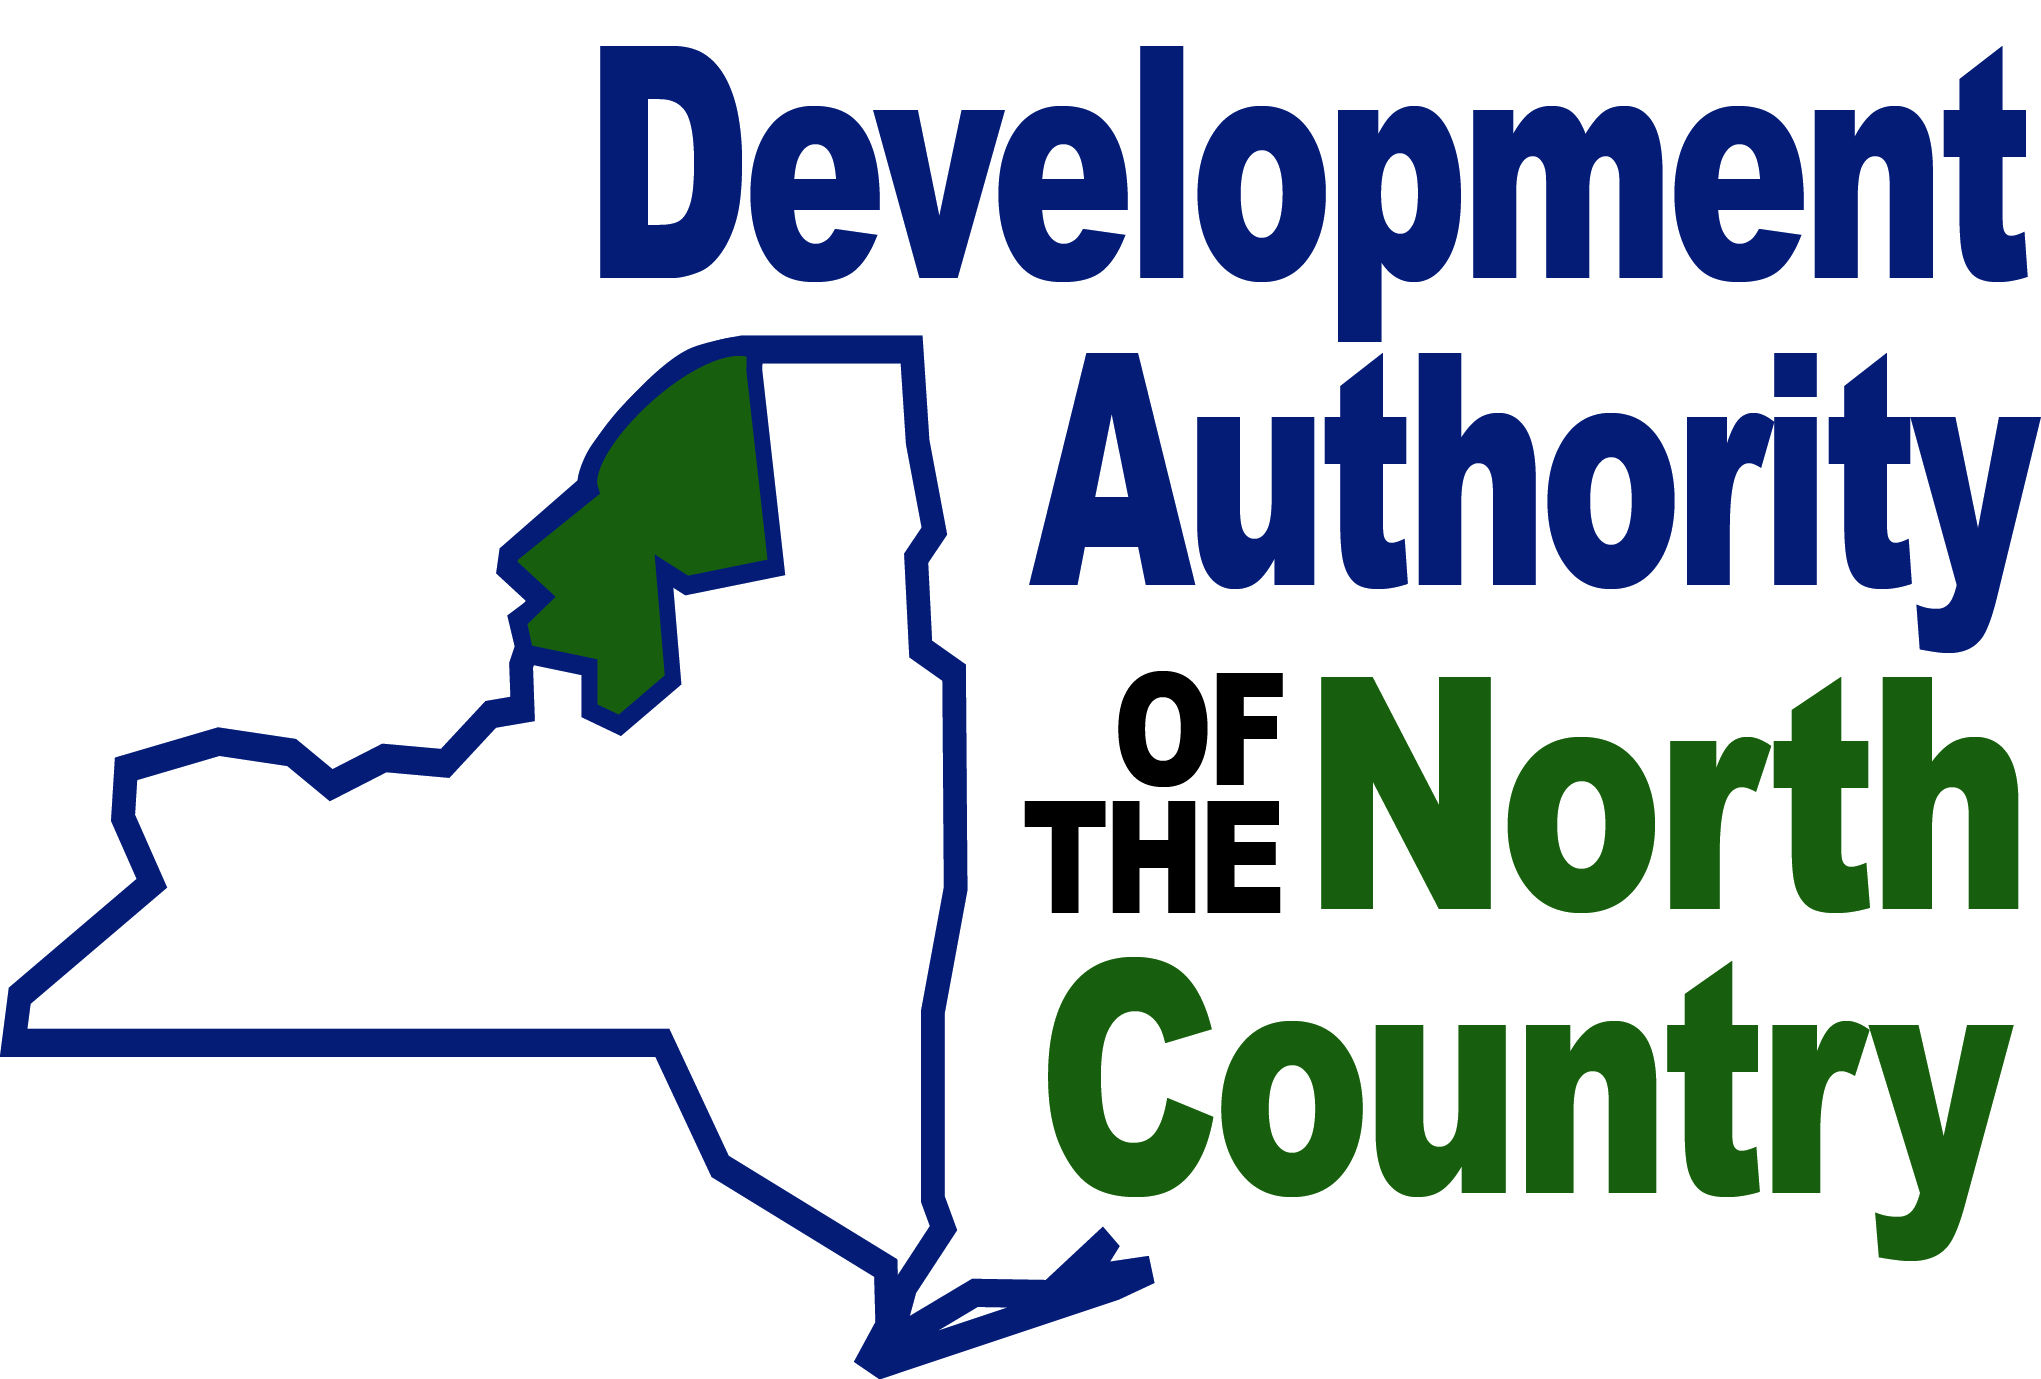 Development Authority of the North Country's Portal